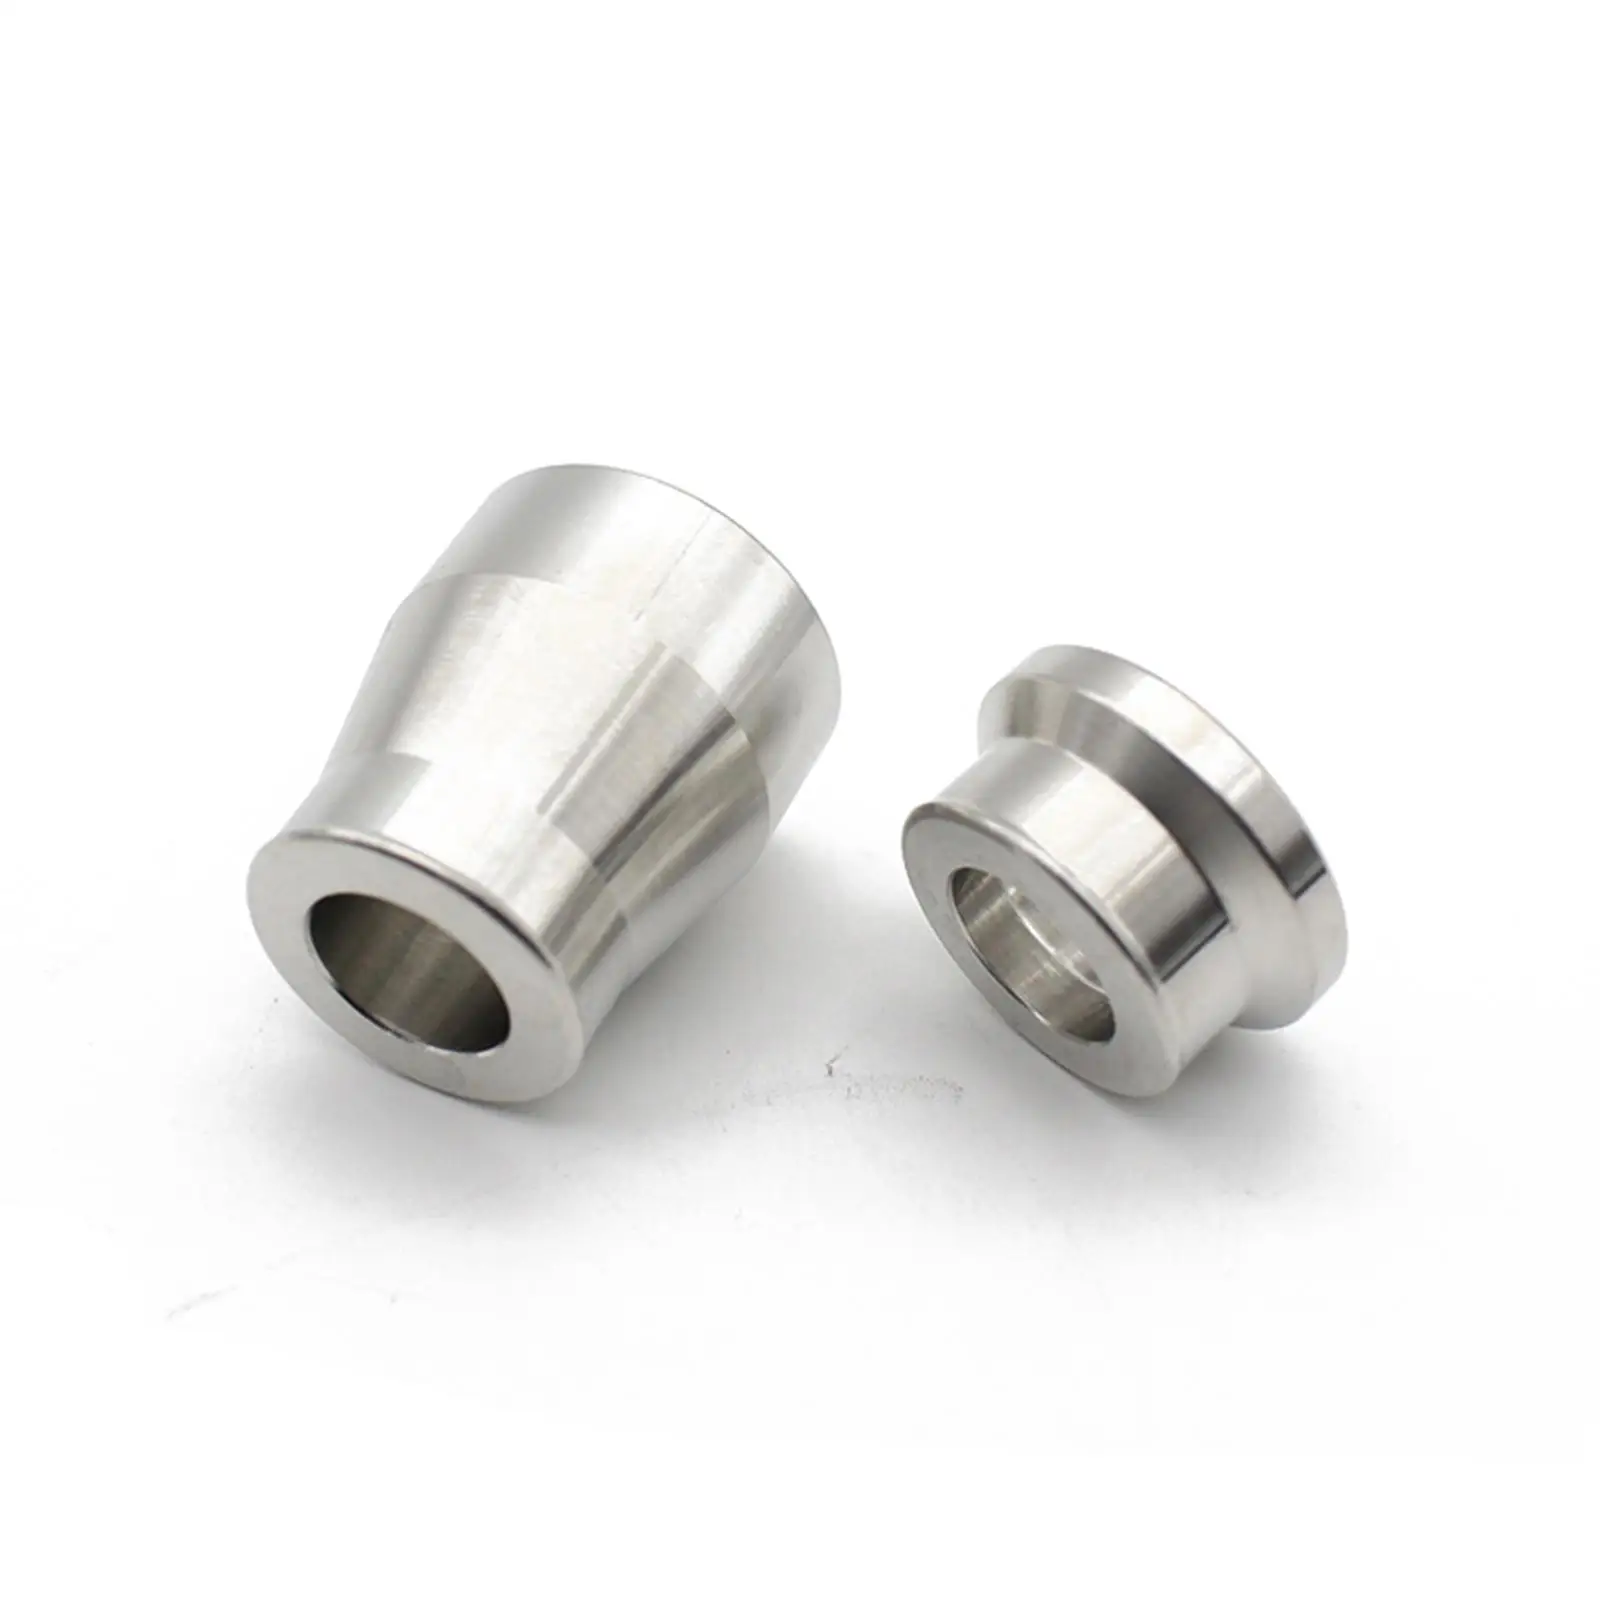 Modified Front Wheel Bushings Accessory Replaces Parts for Kymco Krv180